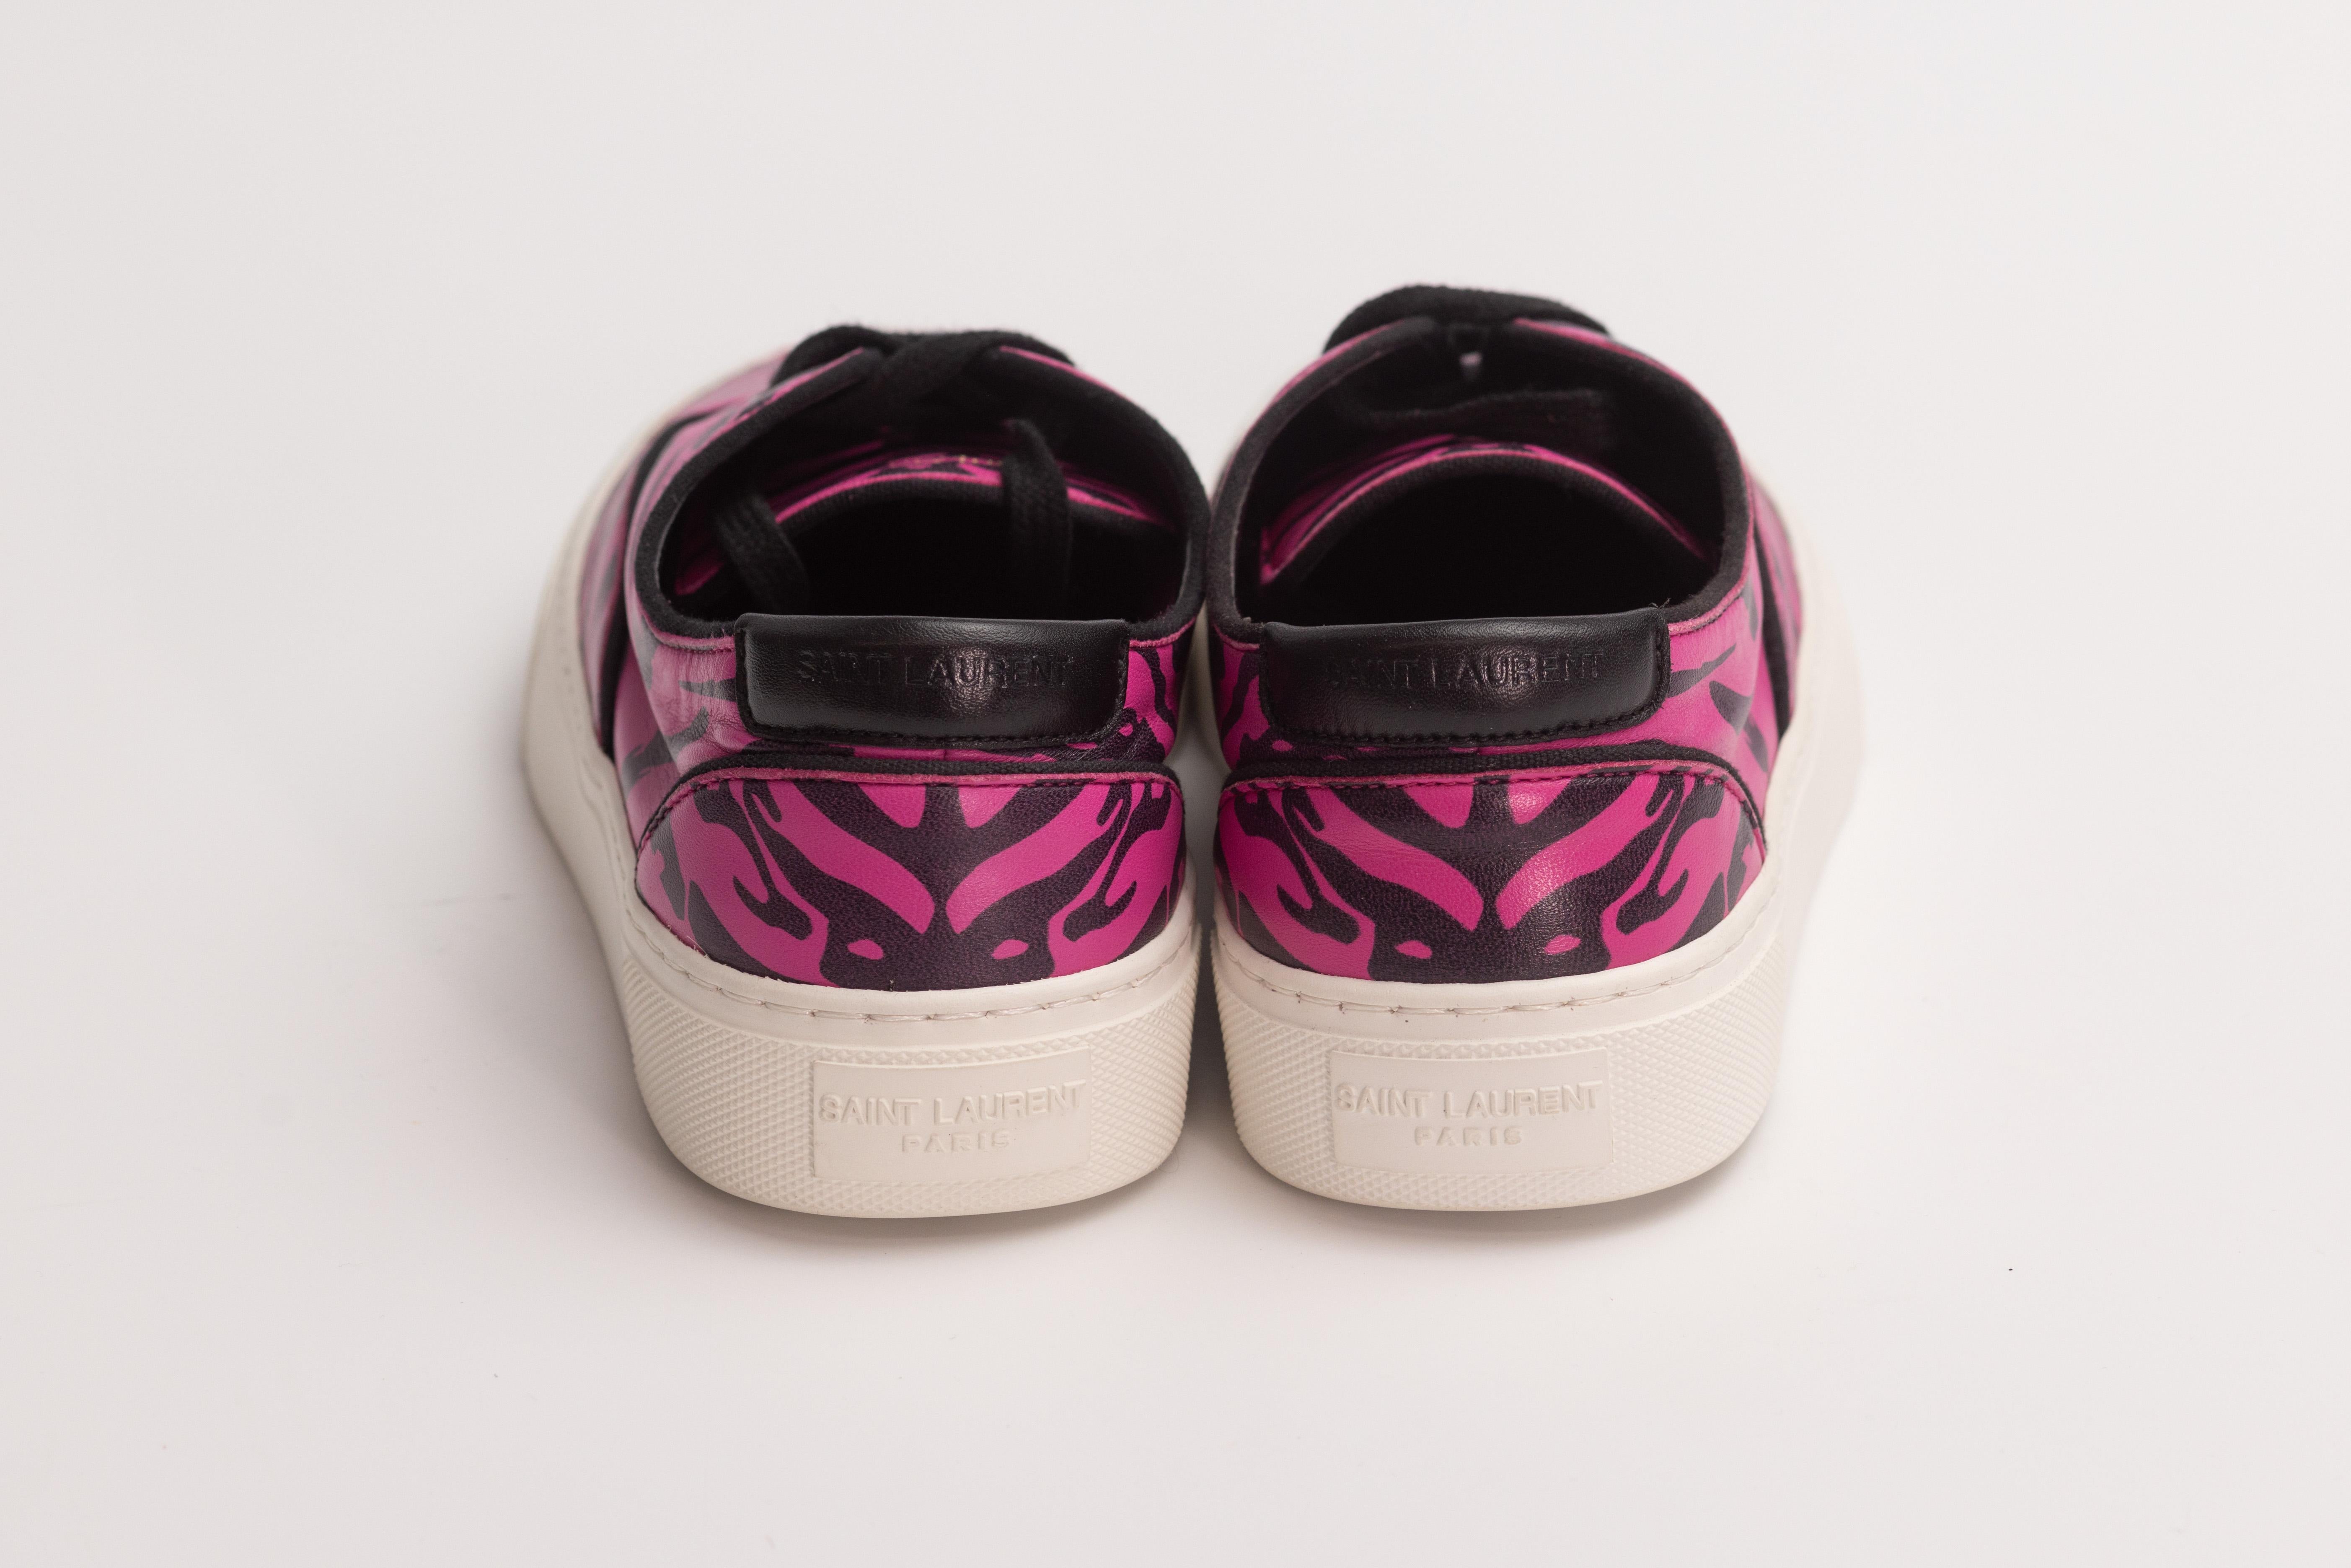 Saint Laurent Venice Low Top Leather Fuchsia Zebra Sneakers (US 6) In Good Condition For Sale In Montreal, Quebec